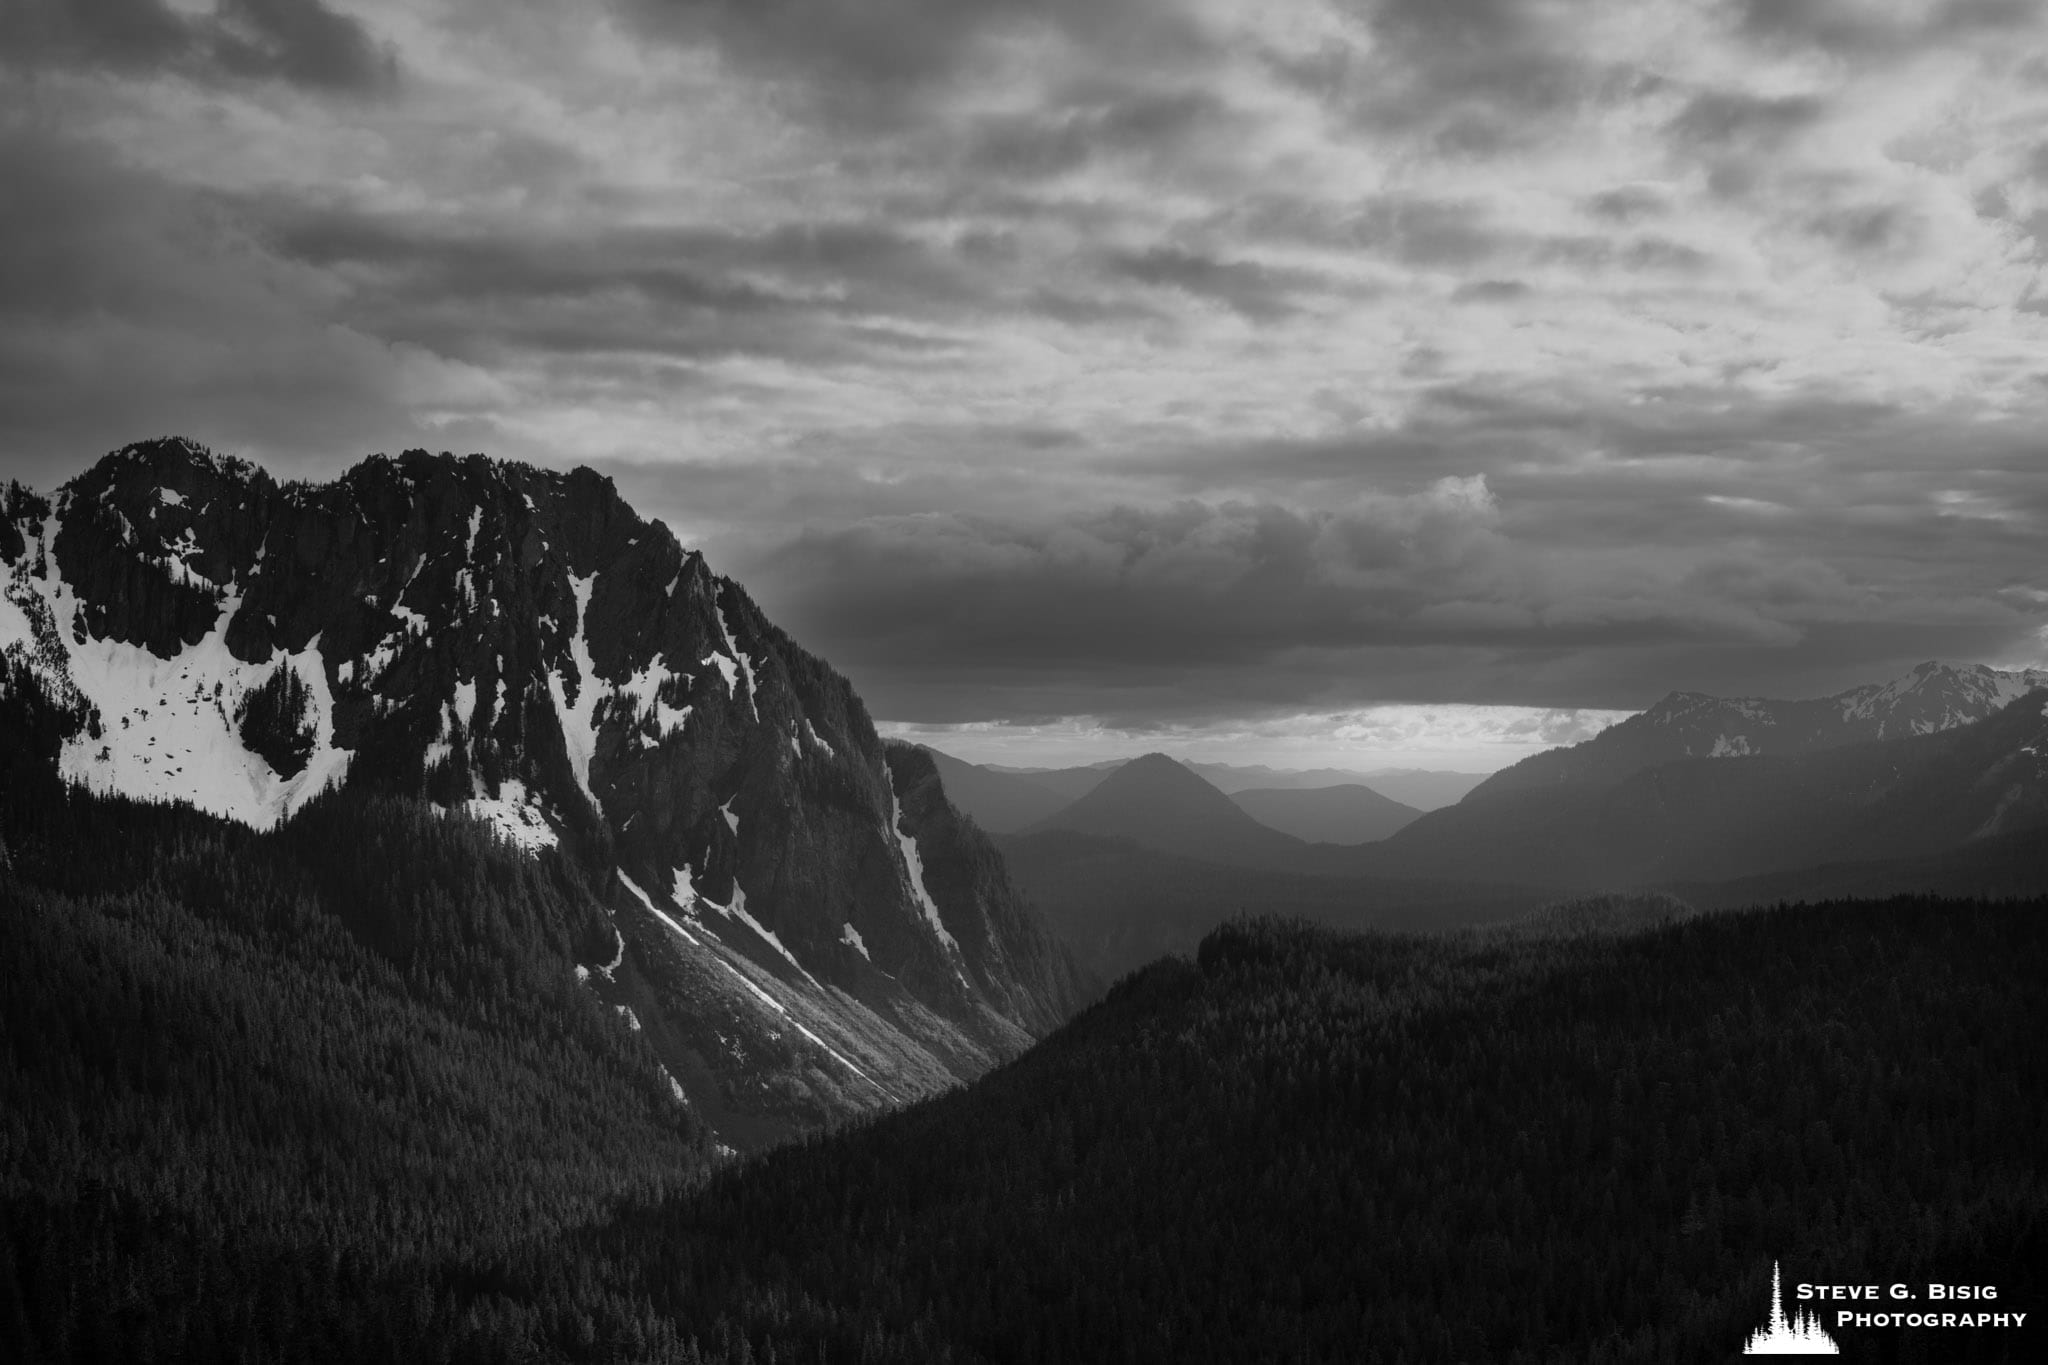 A black and white landscape photograph of the Nisqually River Valley as viewed from the Inspiration Point Overlook at Mt. Rainier National Park, Washington.